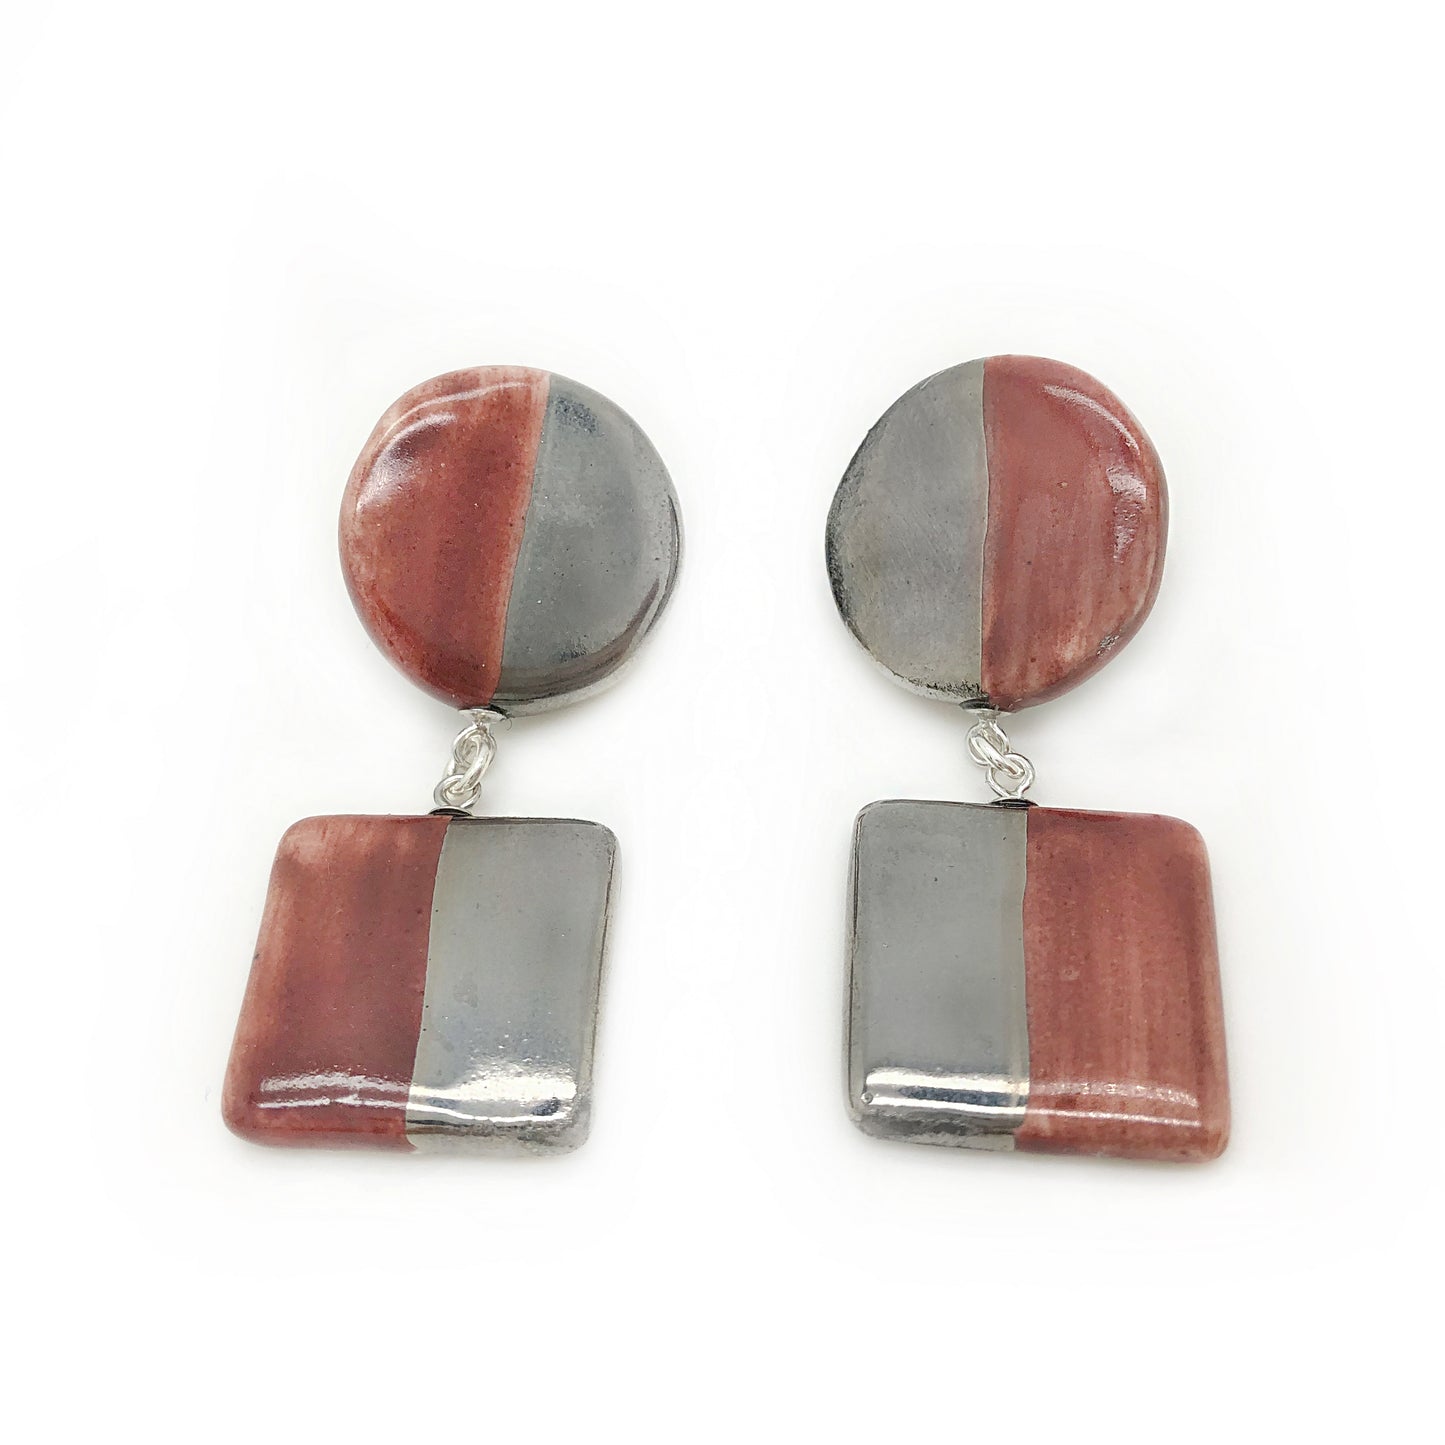 Earrings in platinum and marsala